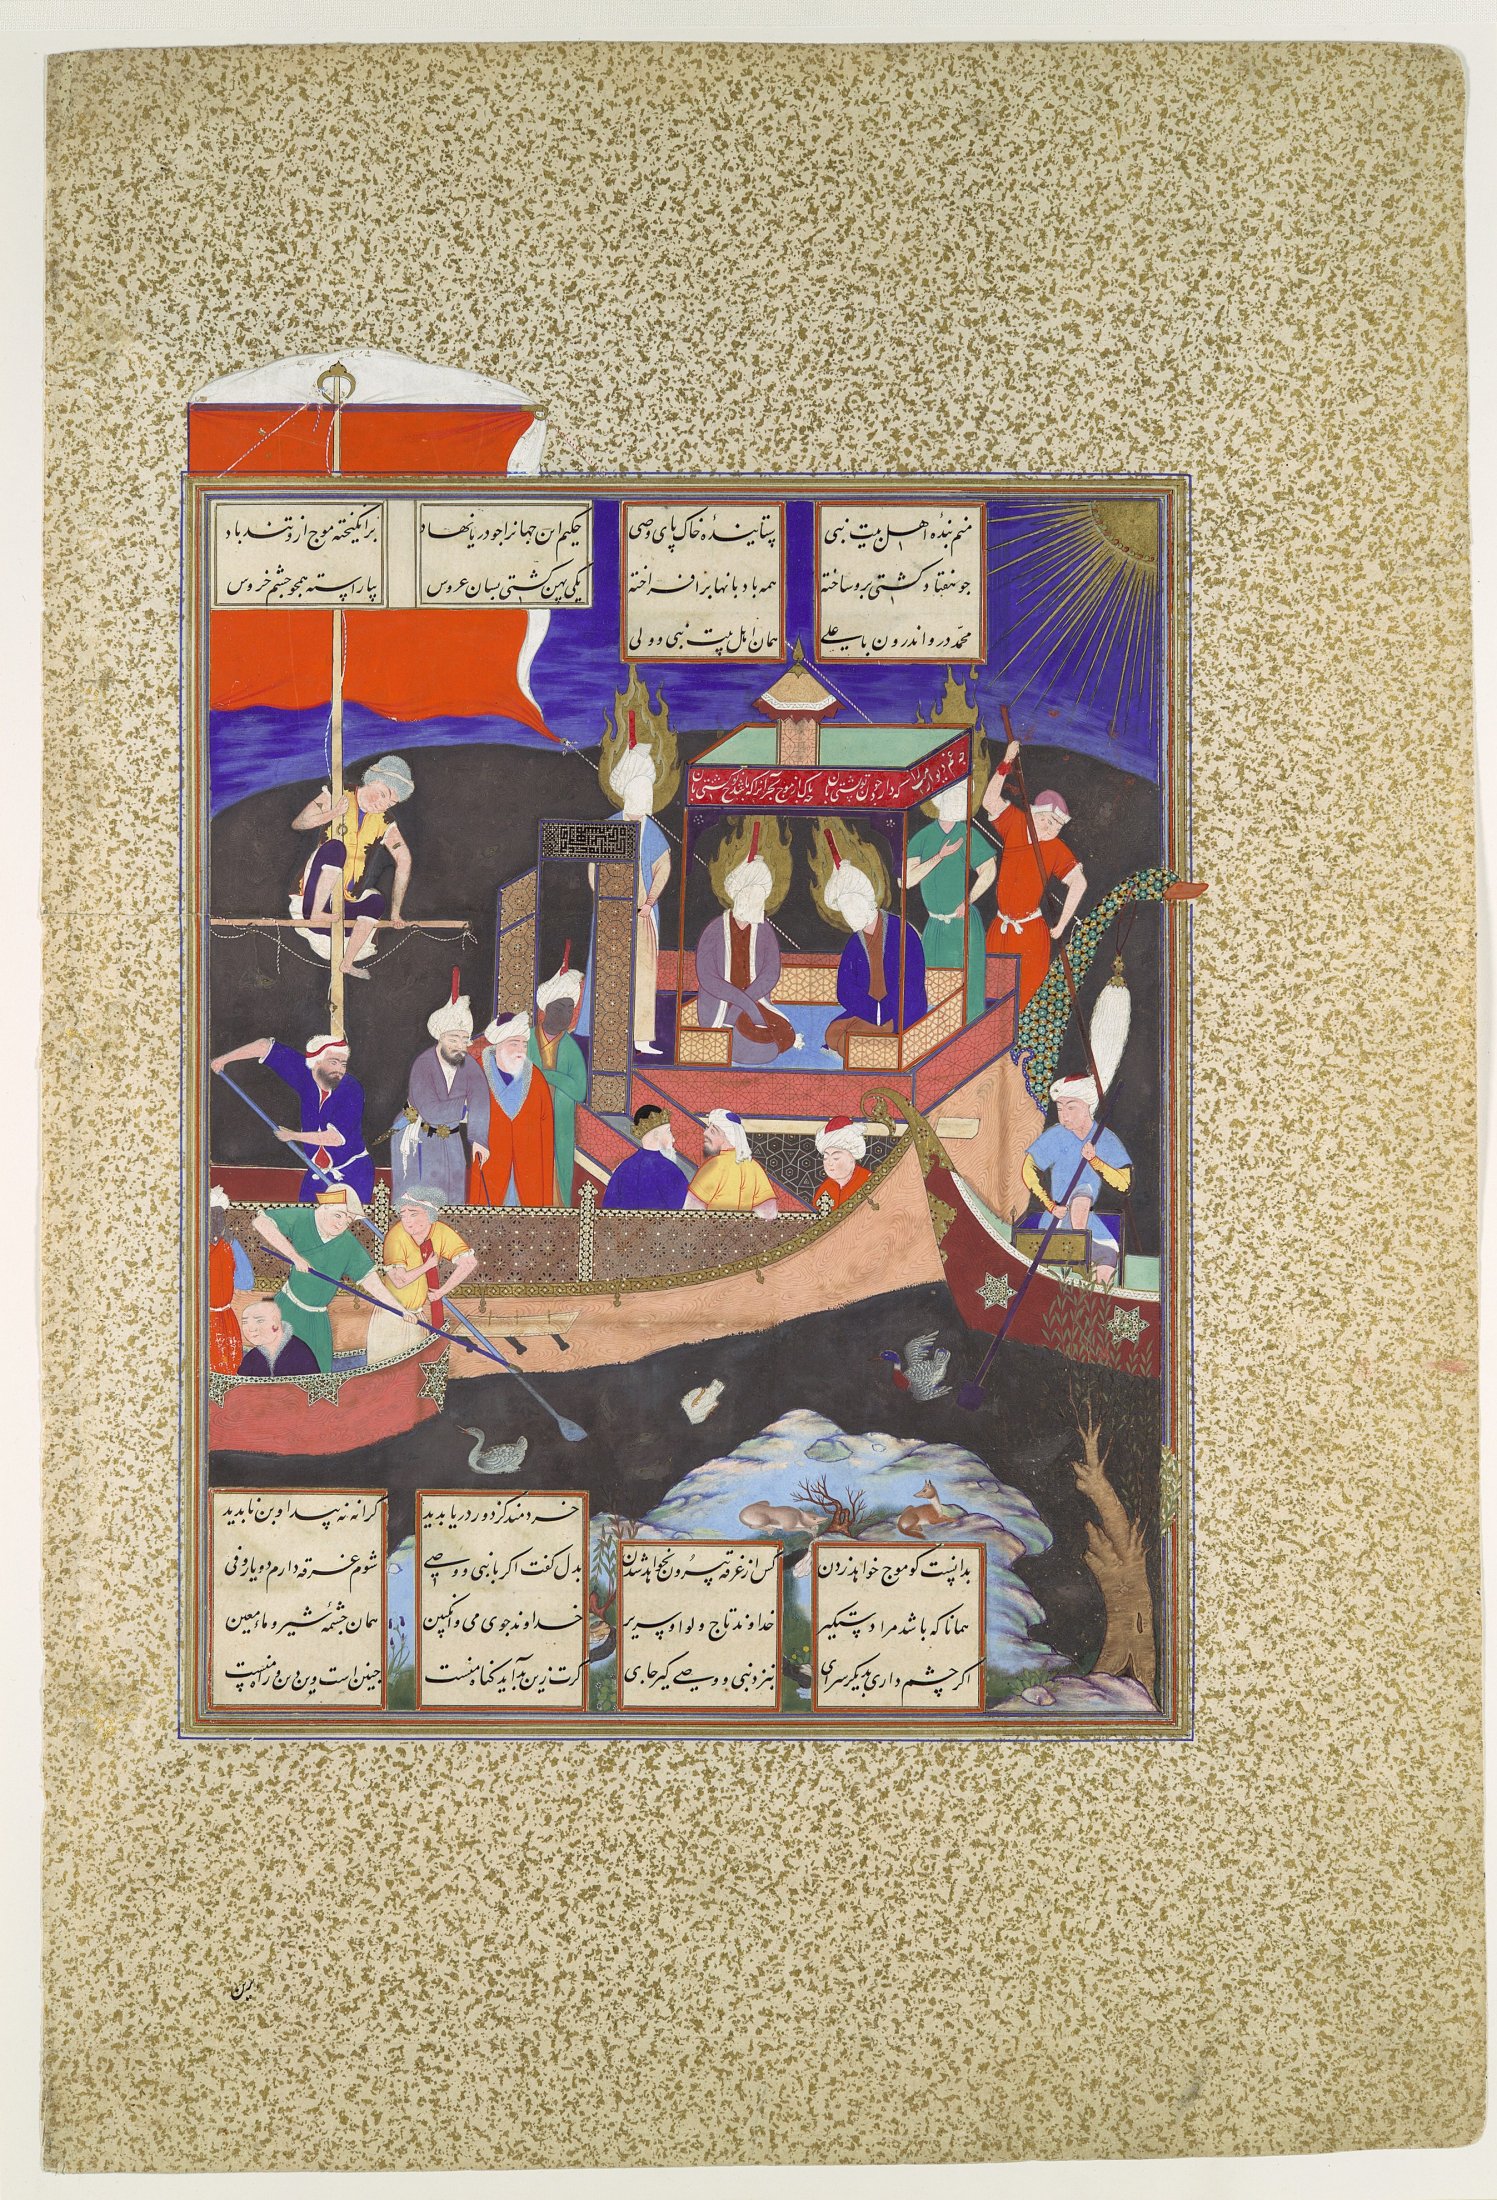  Firdausi\'s Parable Of The Ship Of Shi\'ism , Folio 18v From The Shahnama (Book Of Kings) Of Shah Tahmasp MET DP107118